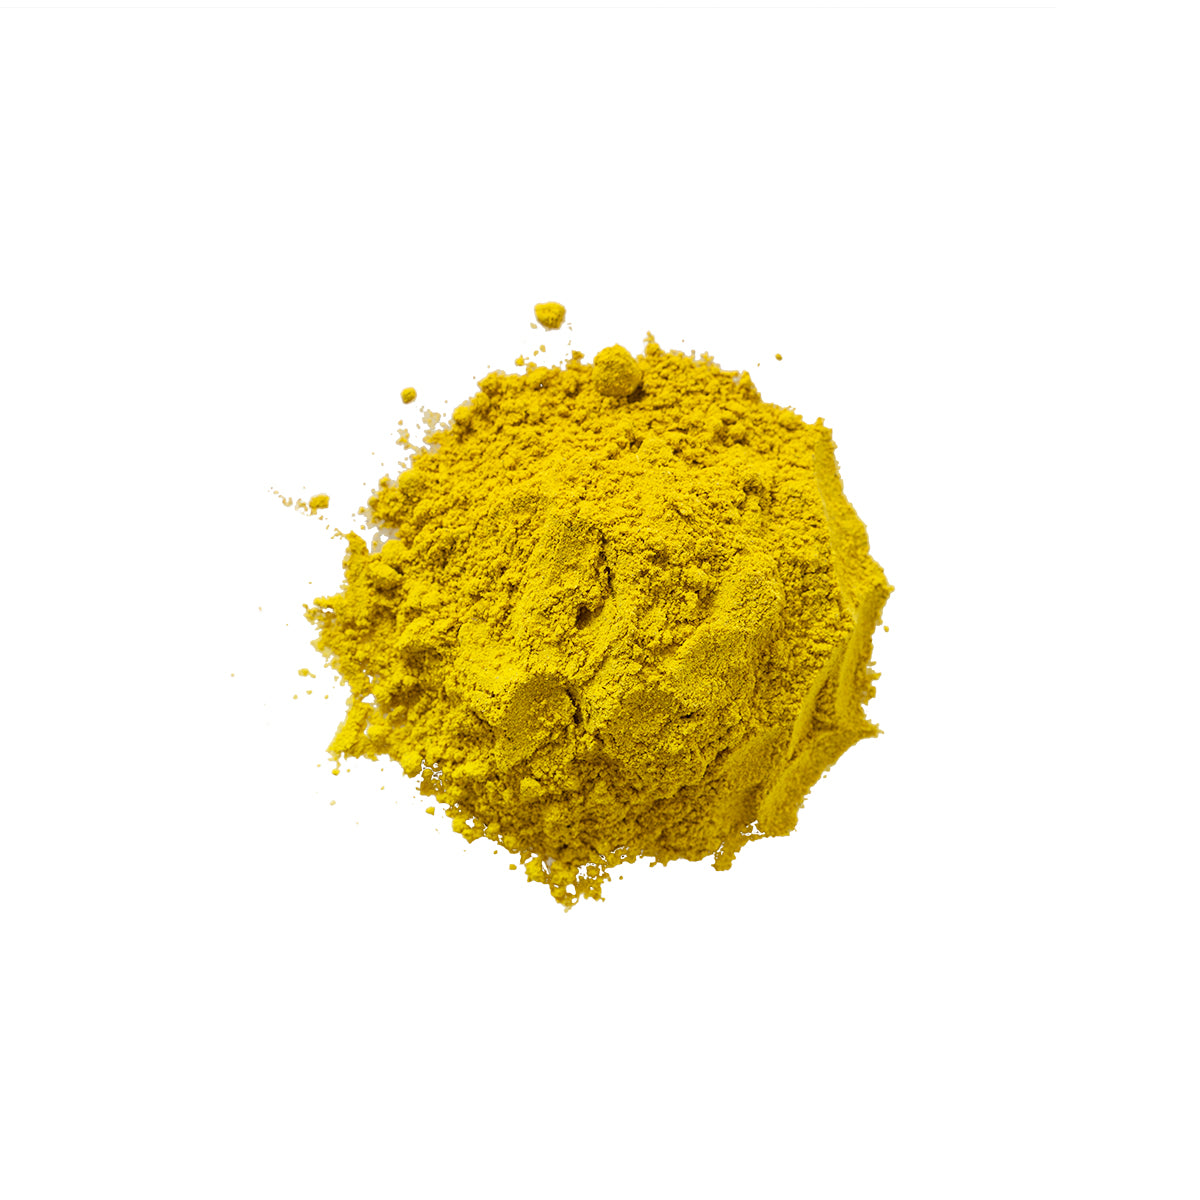 Primary Image of Goldenseal Root Powder (Hydrastis canadensis)